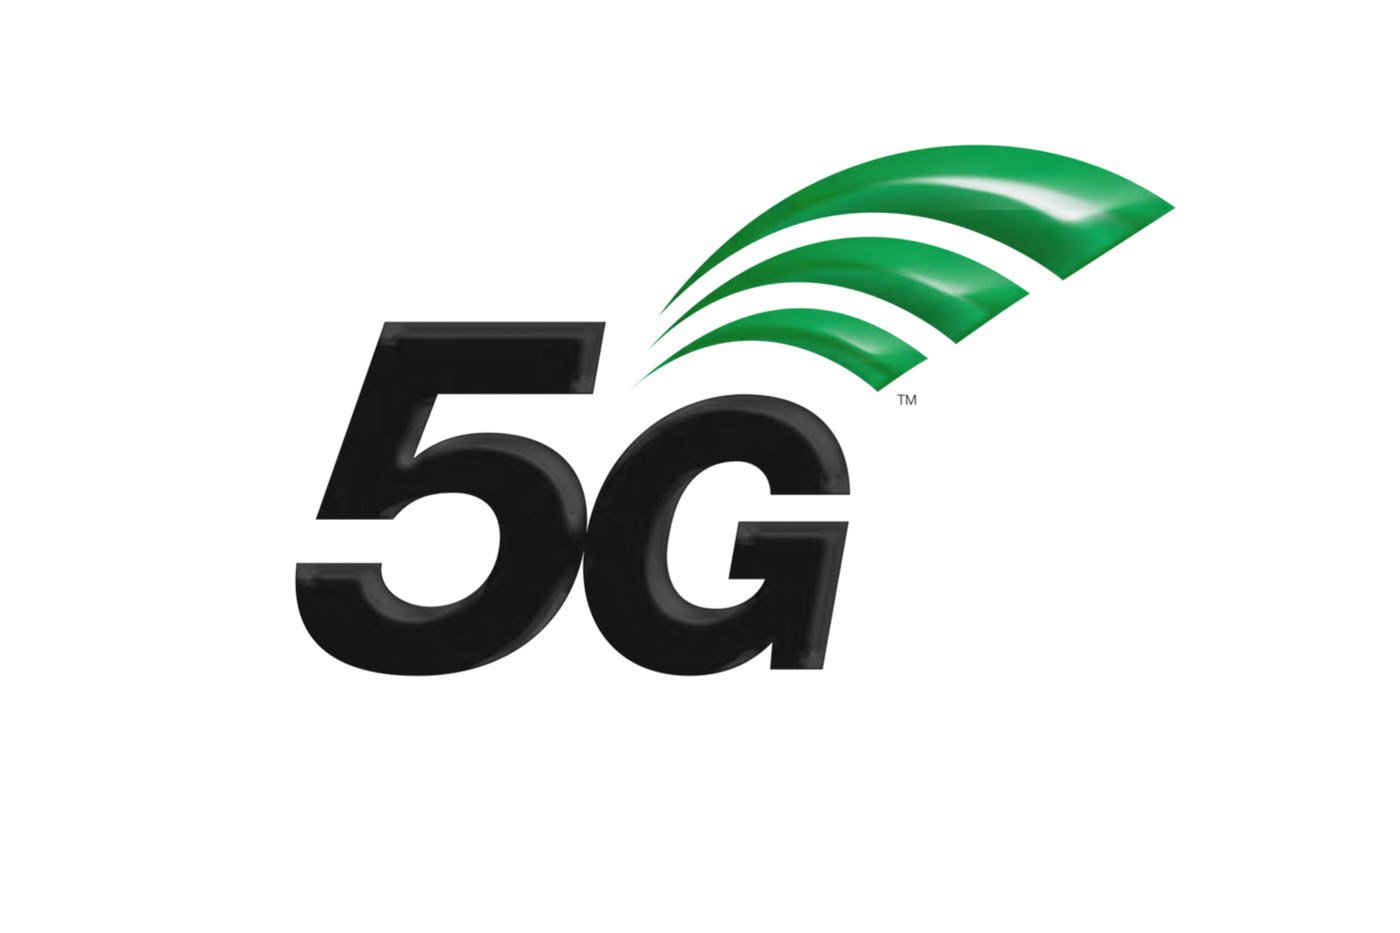 qualcomm demonstrates practical 5g (nr) speed at mwc 2018